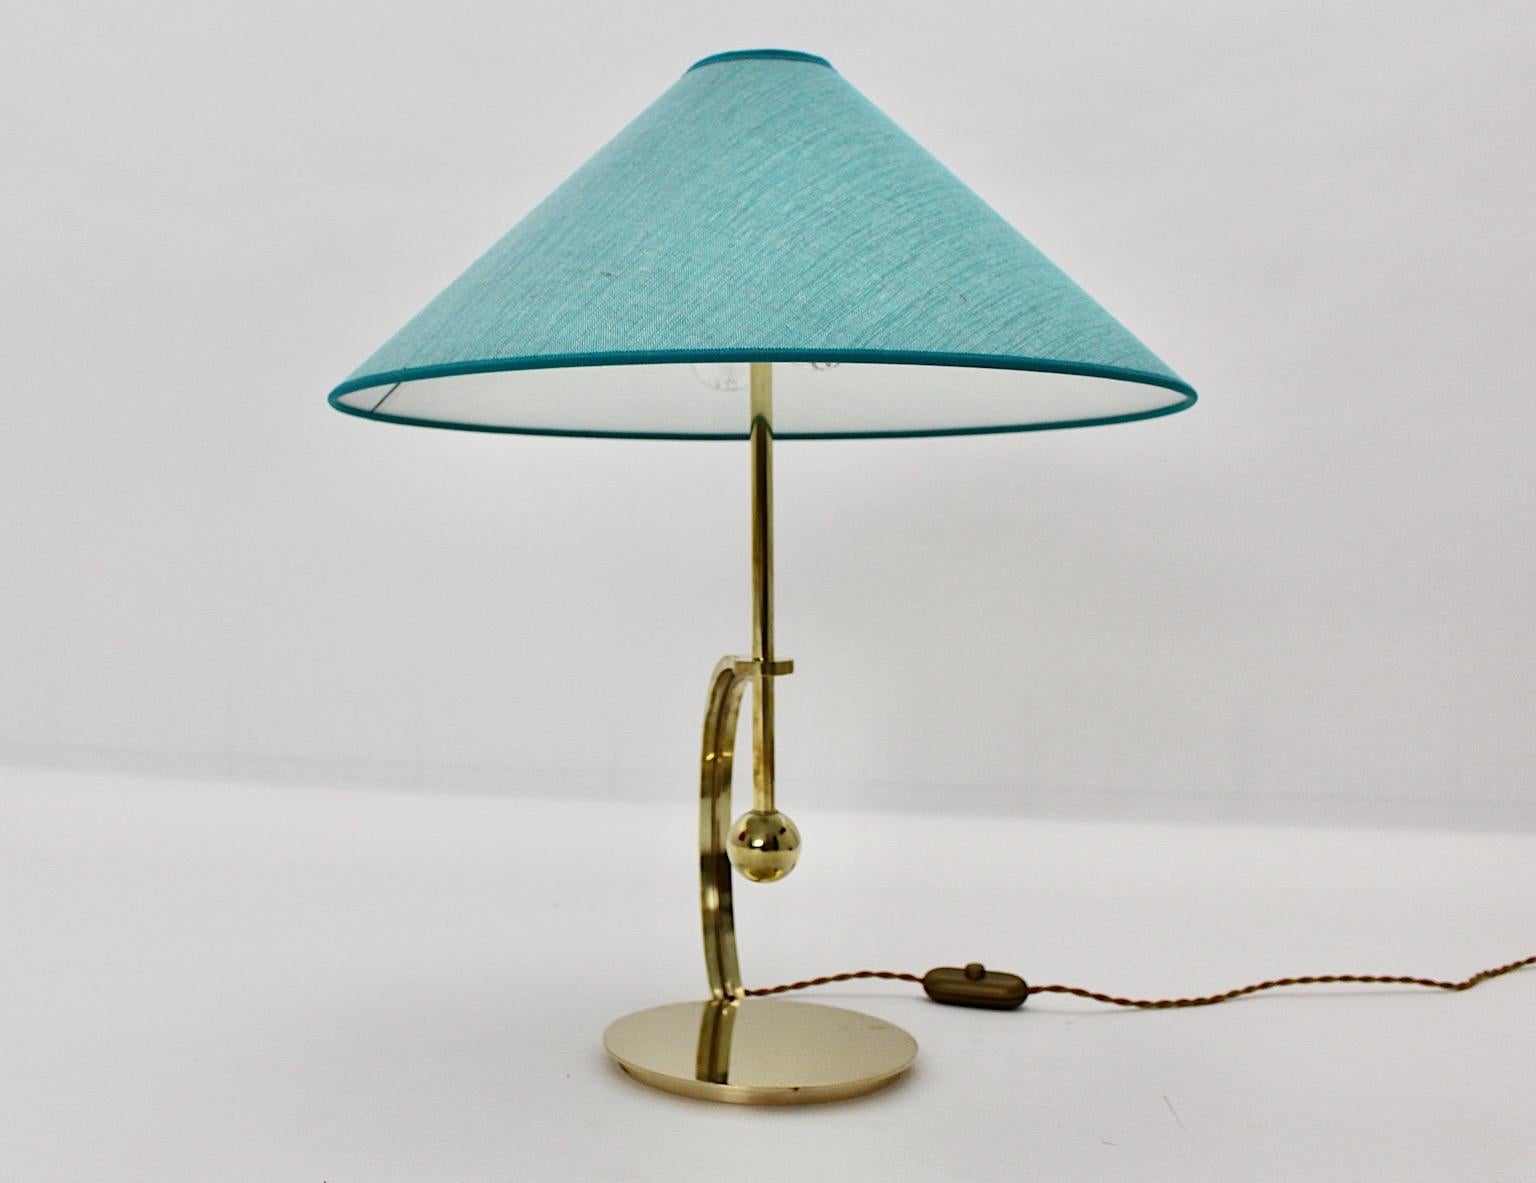 Art Deco Brass Vintage Table Lamp Blue Teal Textile Shade Vienna C 1925 For Sale 6